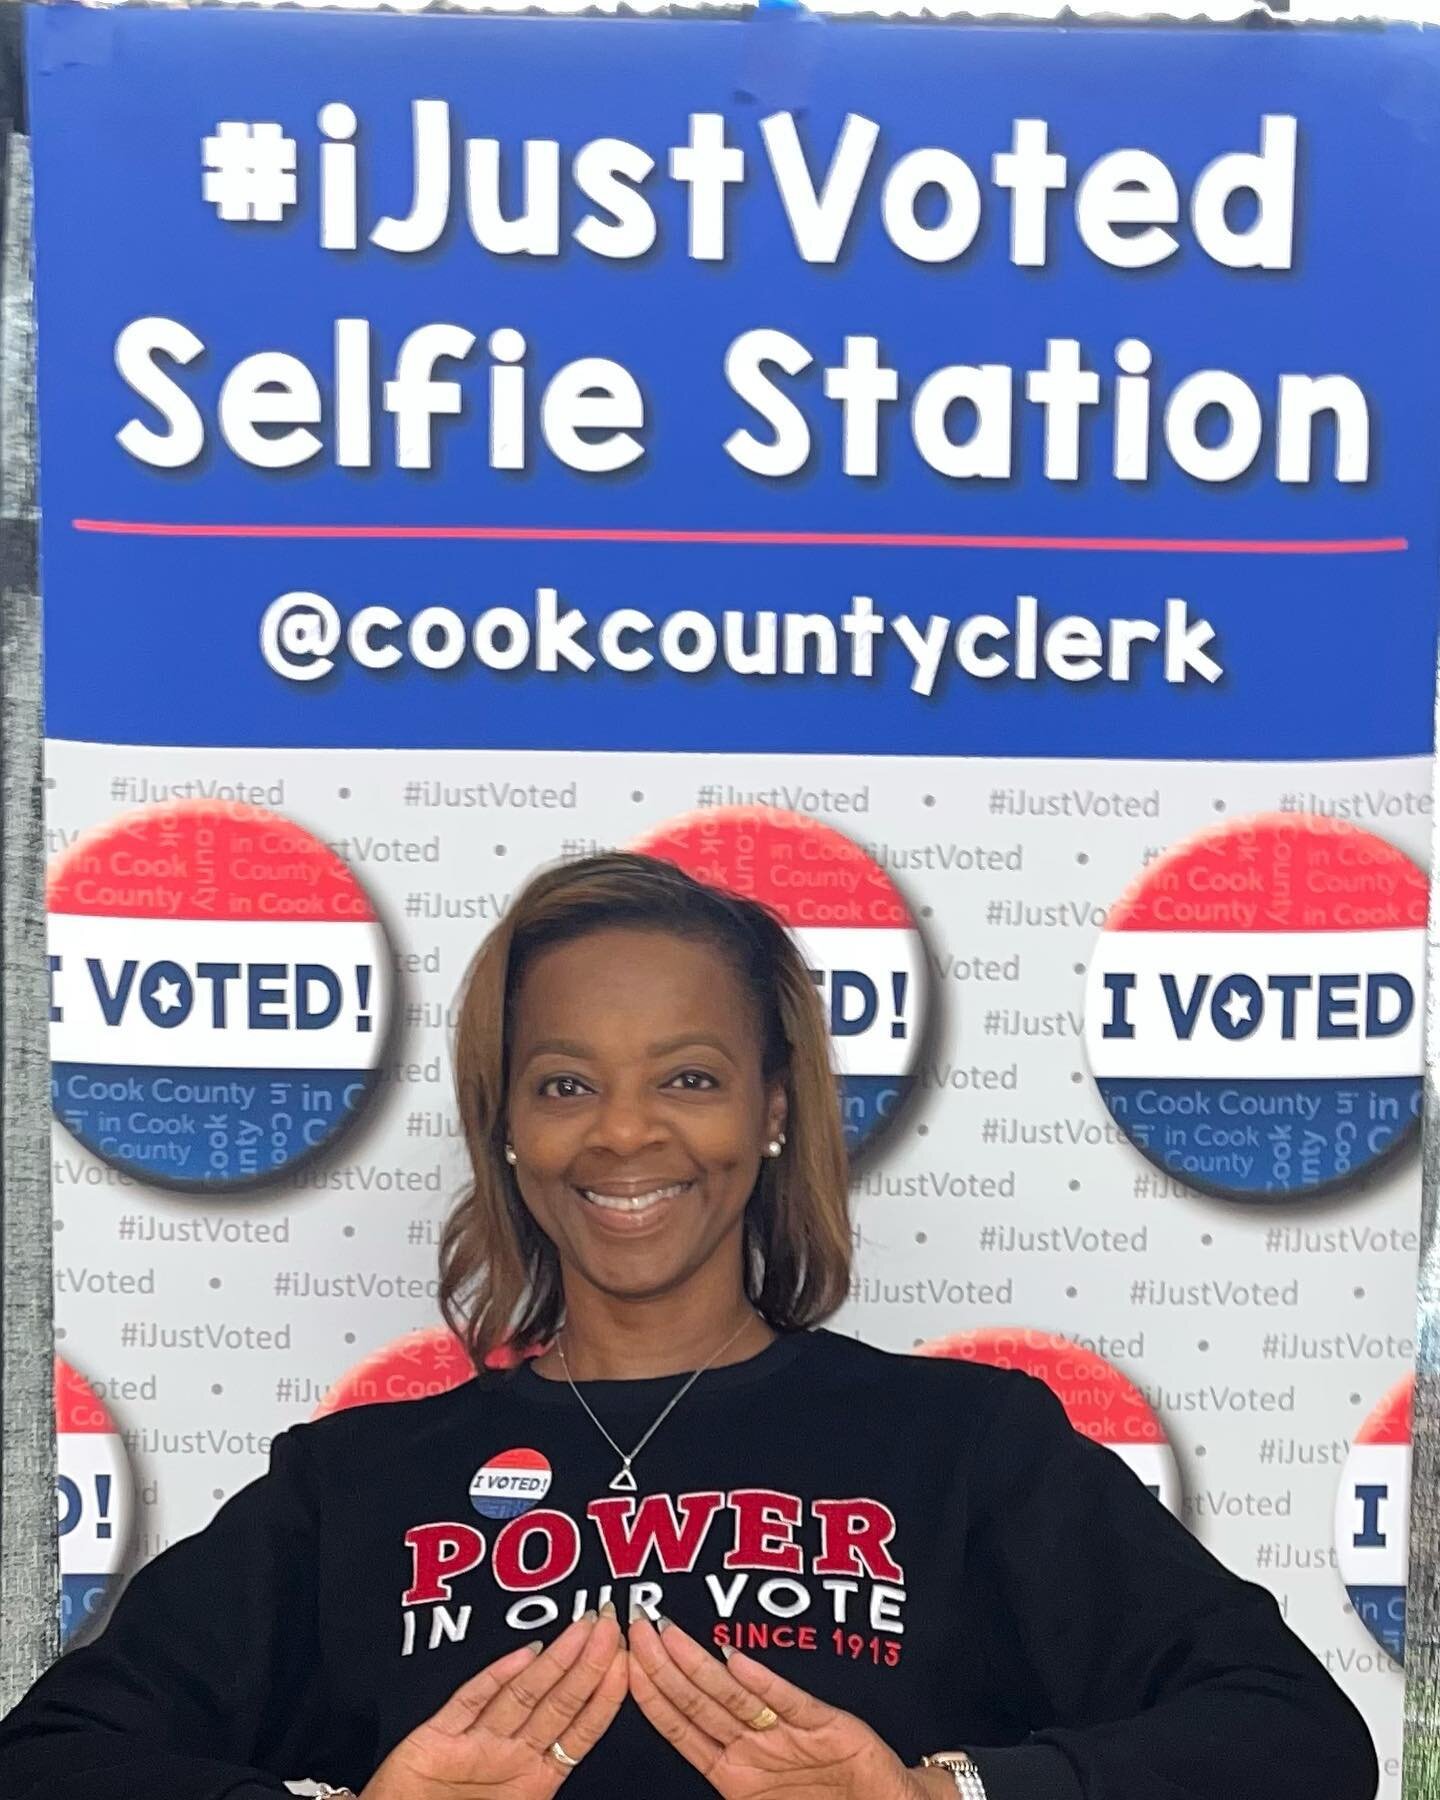 Proud to exercise my right to vote!

#JASSACDeltas
#DST1913
#MidwestDST
#ForwardWithFortitude
#ElevatingOurImpact